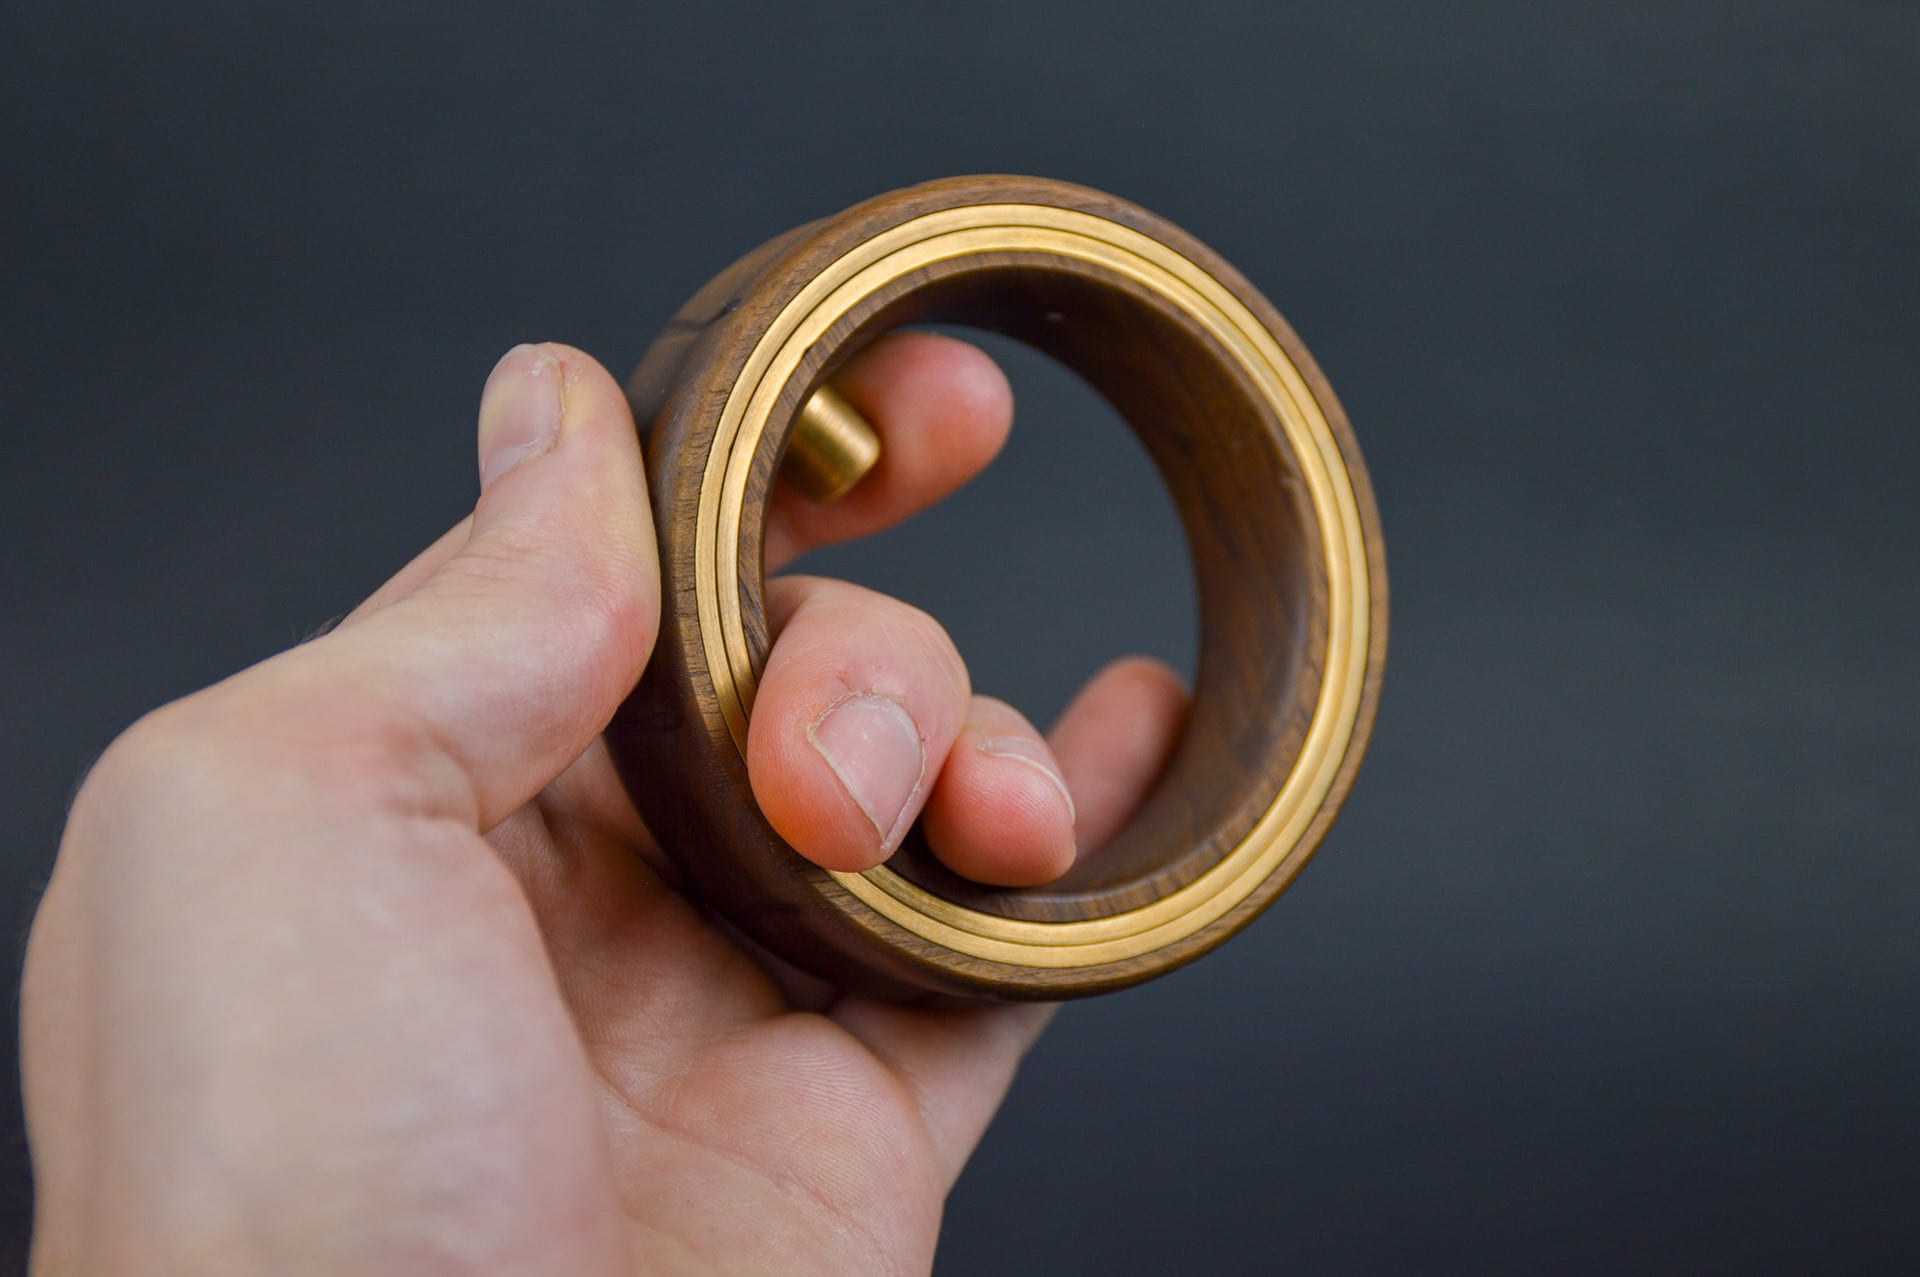 A walnut and brass ring being held